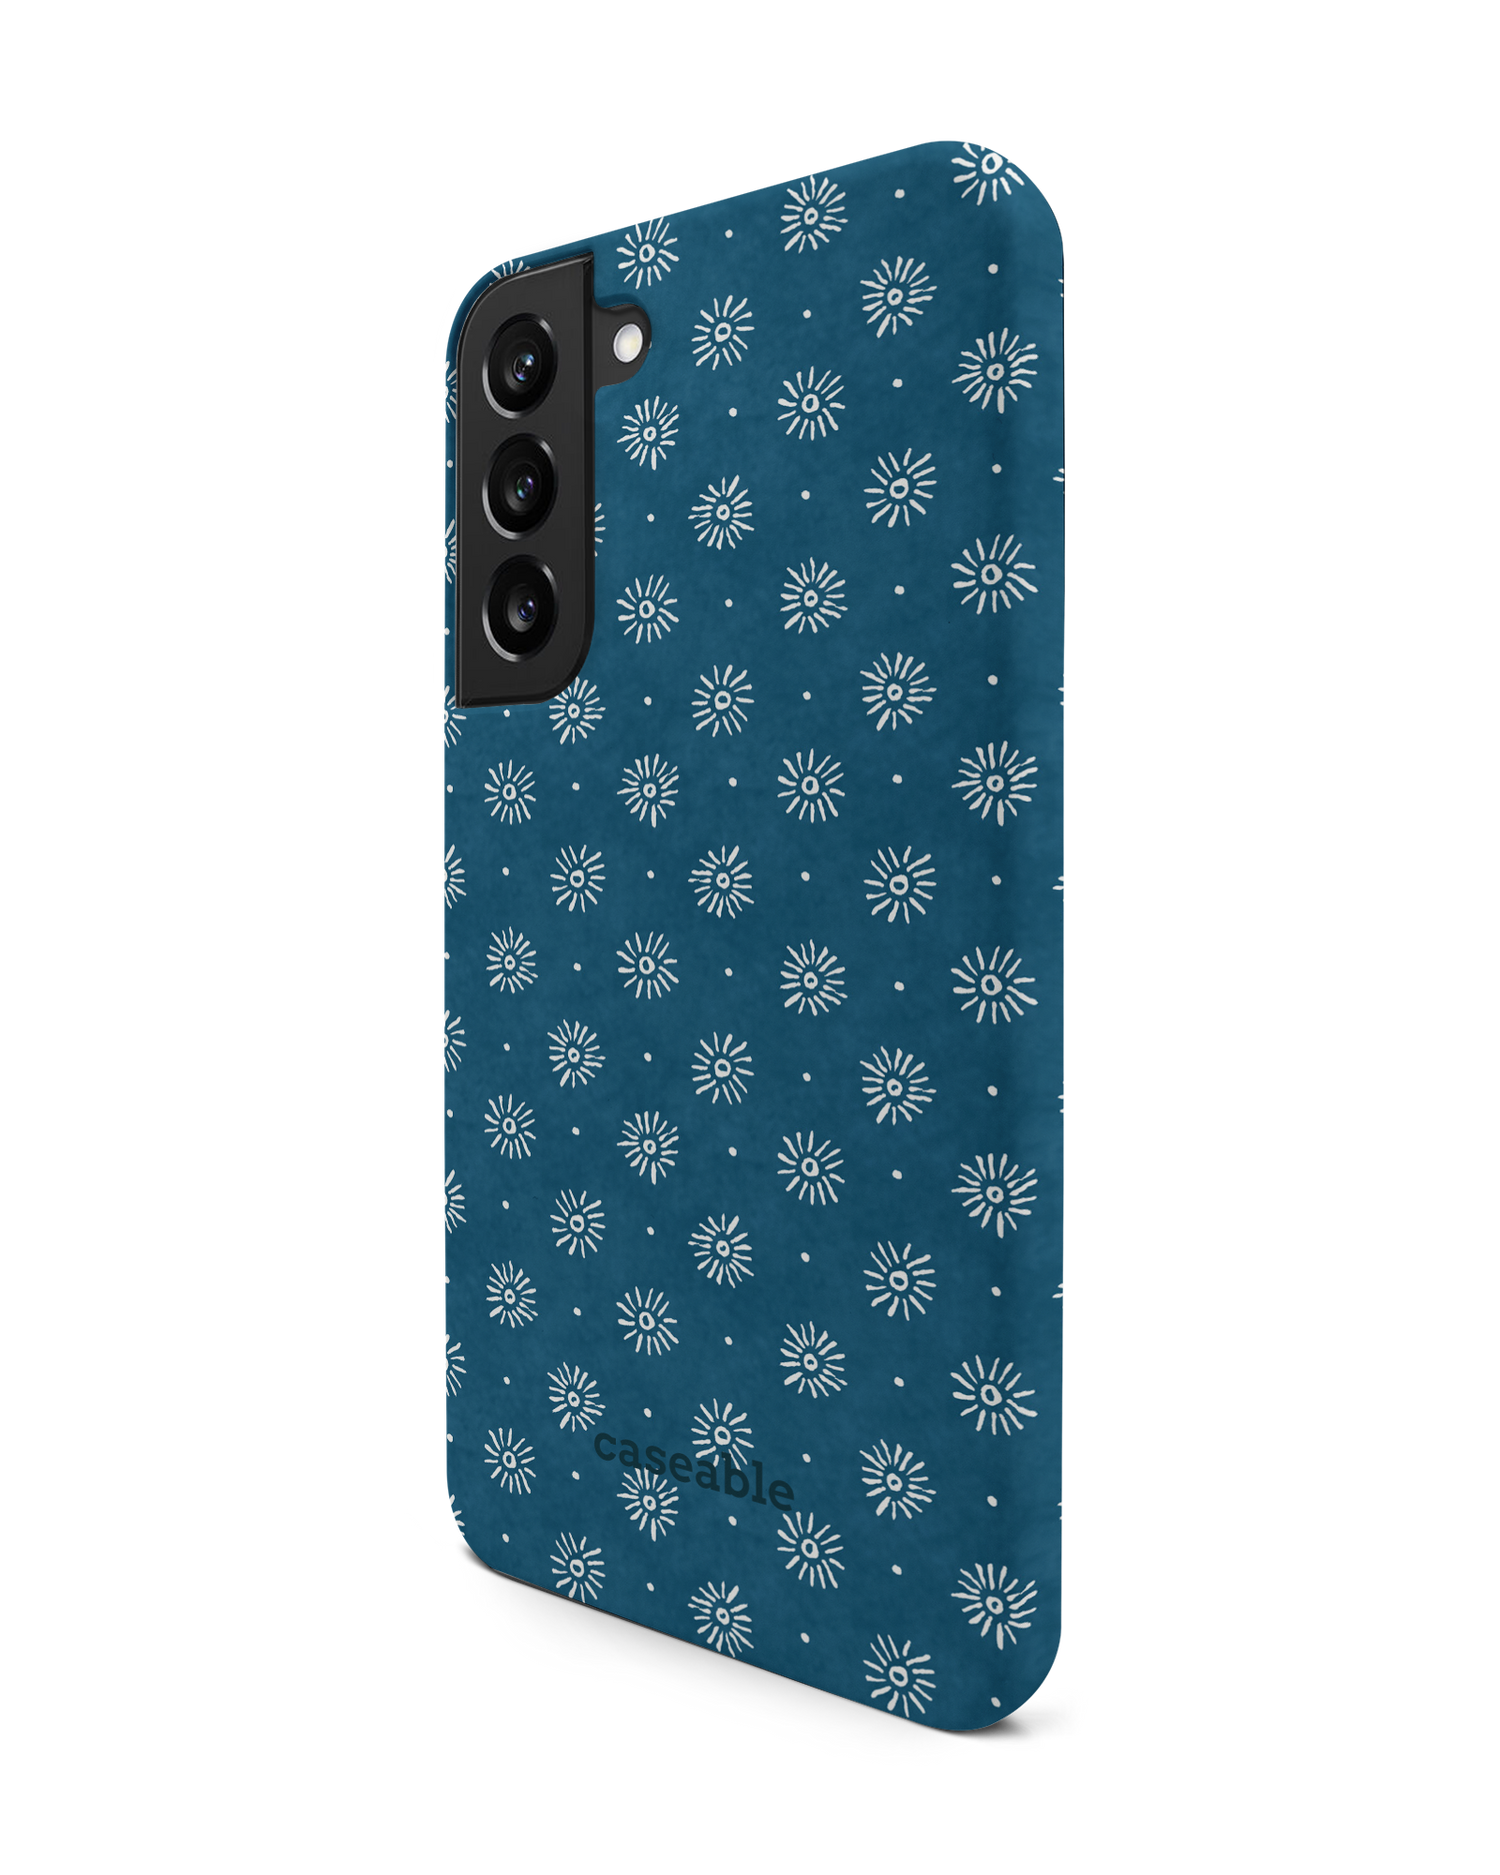 Indigo Sun Pattern Premium Phone Case Samsung Galaxy S22 Plus 5G: View from the right side